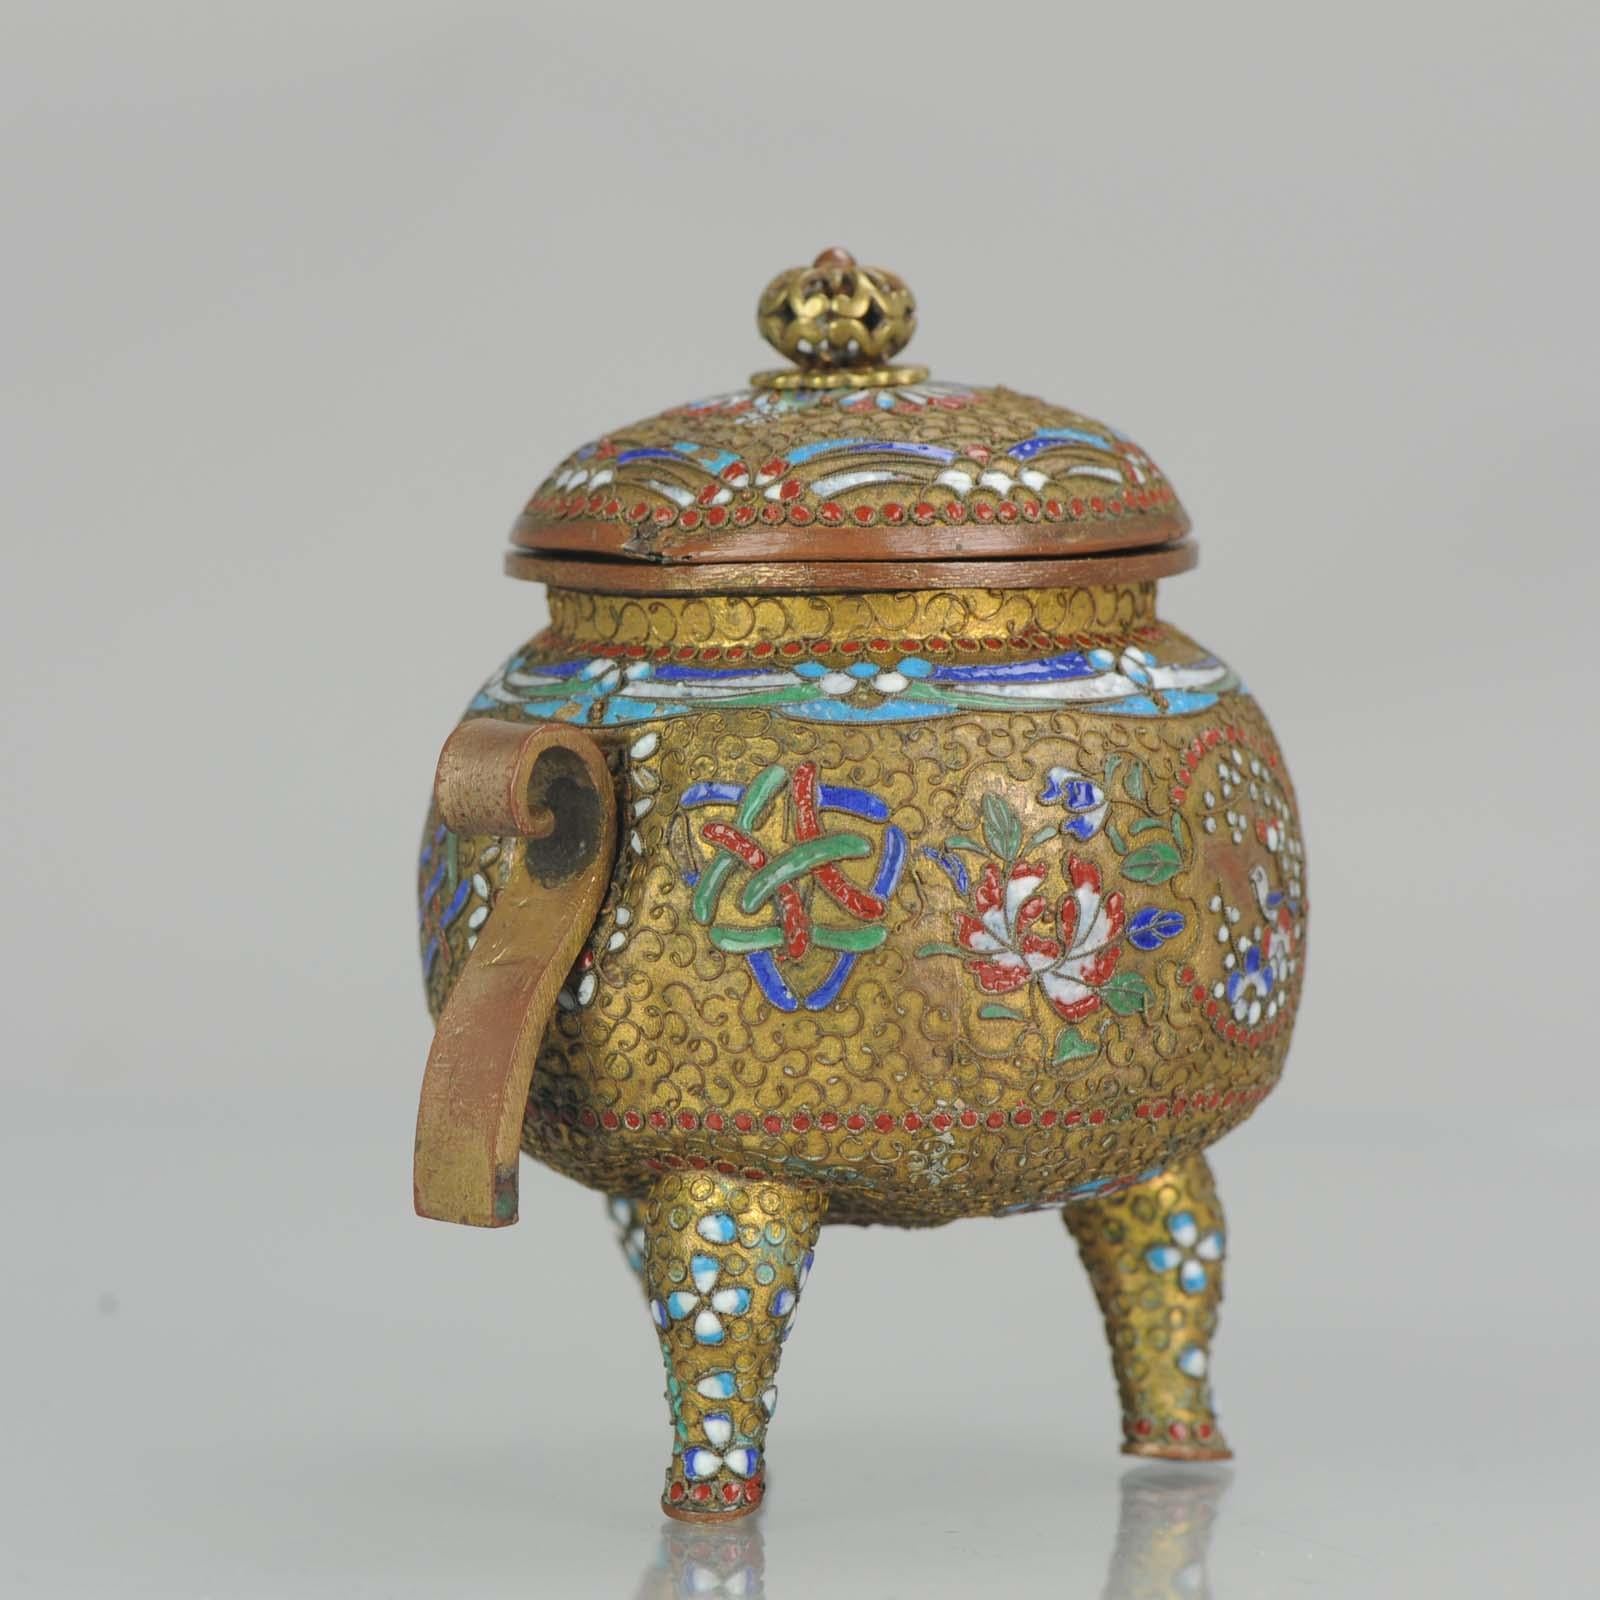 Top Antique Bronze / Copper Cloisonné Burner Inscense Koro China, 19th Century

Nice Quality with superb decoration.

Additional information:
Material: Bronze / Copper 
Type: Vase
Region of Origin: China
Period: 19th century, 20th century
Condition: